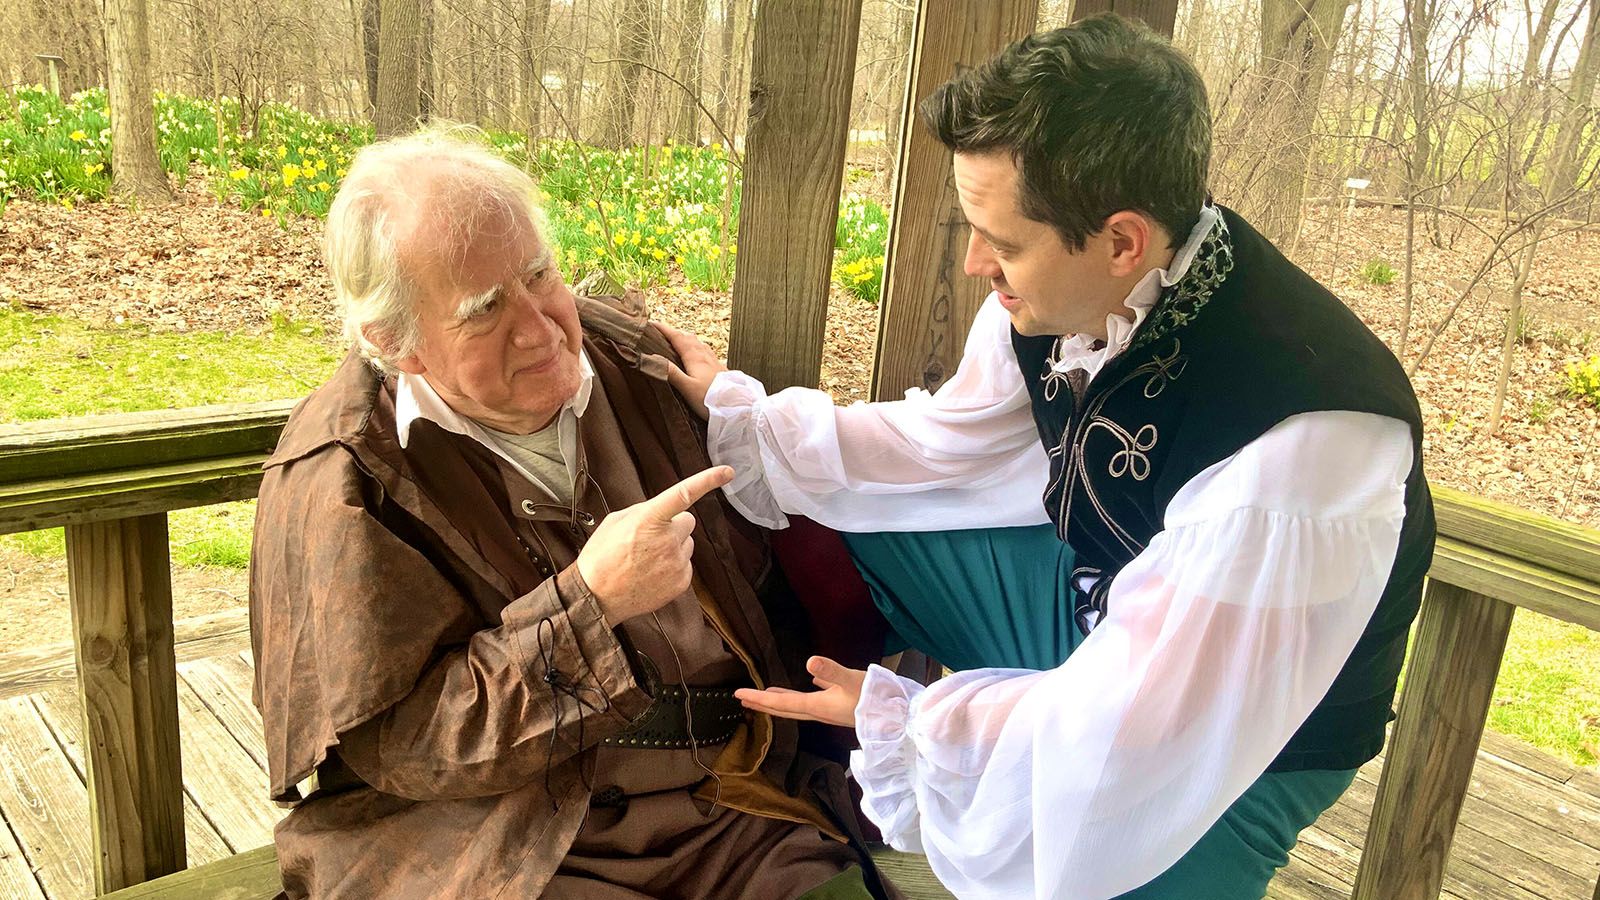 A portion of Fort Wayne Philharmonic’s performance of Beethoven with Philippe Quint on Saturday, April 13, will include scenes from William Shakespeare’s Falstaff, incorporating local actors, including Bob Haluska, left, and Kevin Torwelle.